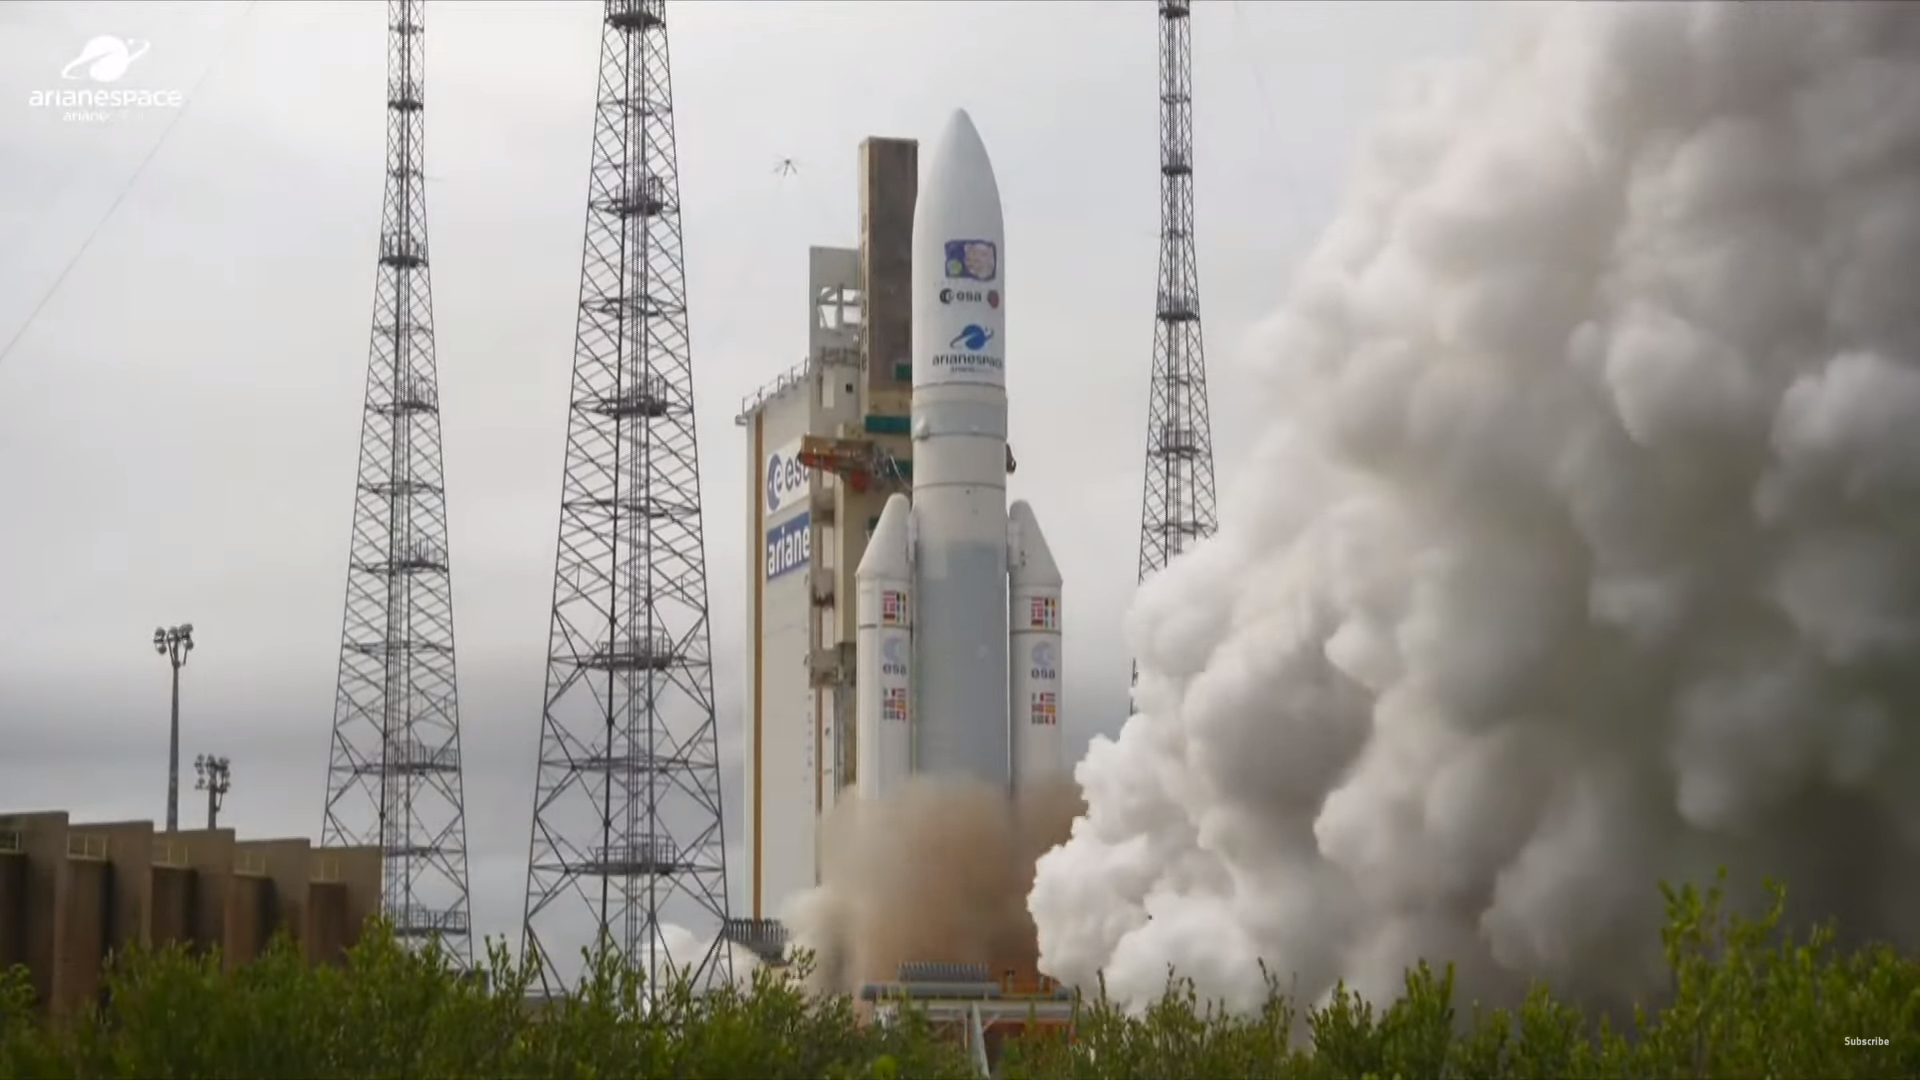 JUICE launch ‘perfectly delivered’, Arianespace CEO says